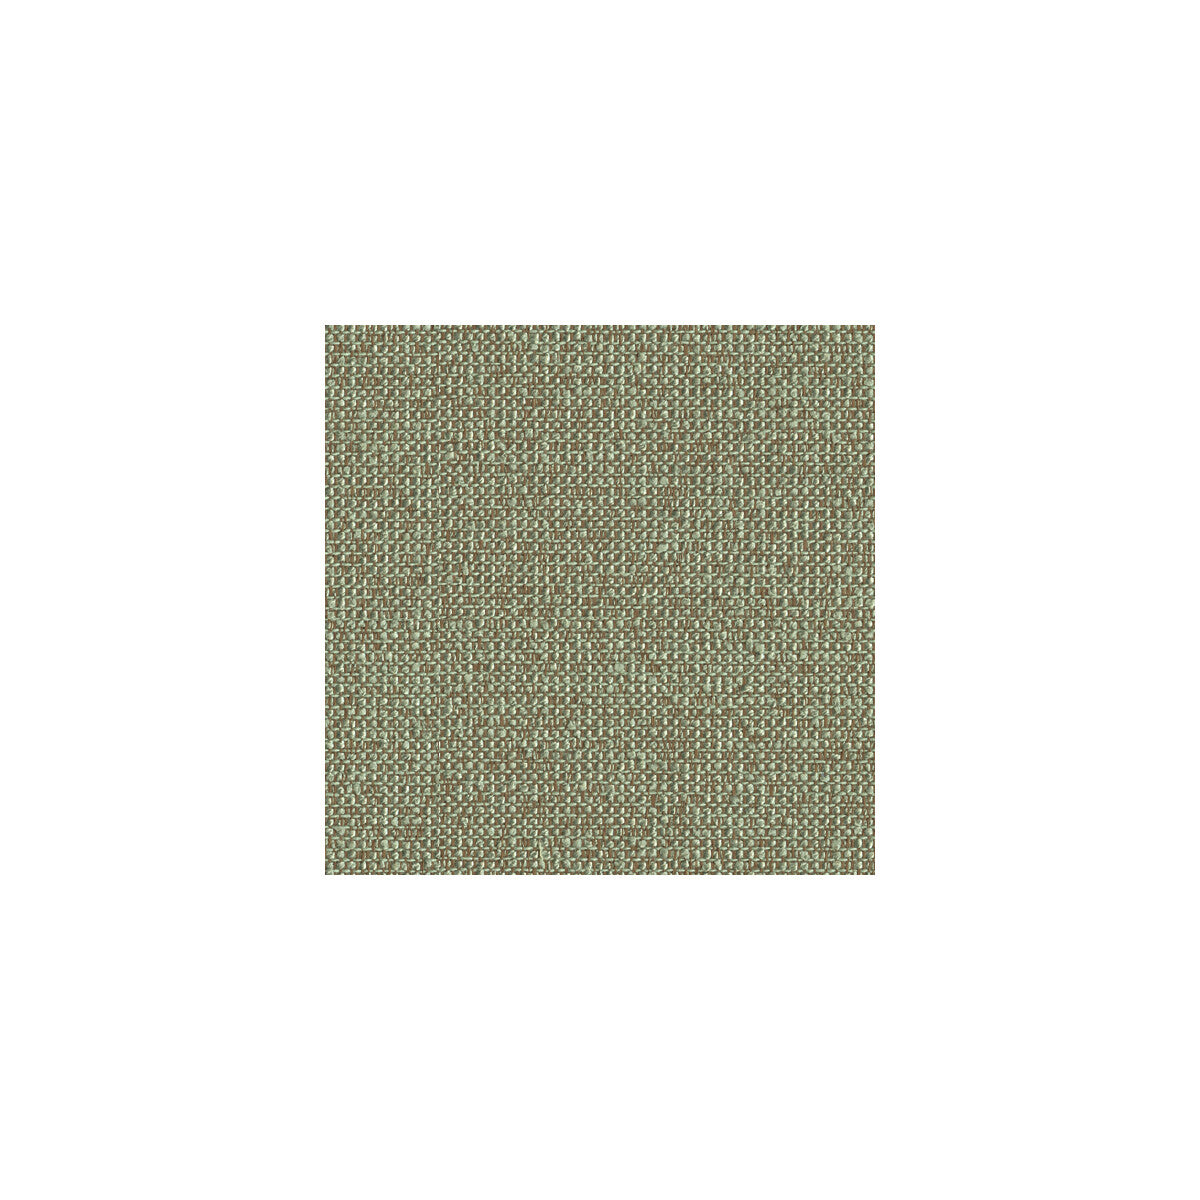 Accolade fabric in opal color - pattern 31516.135.0 - by Kravet Contract in the Contract Gis collection